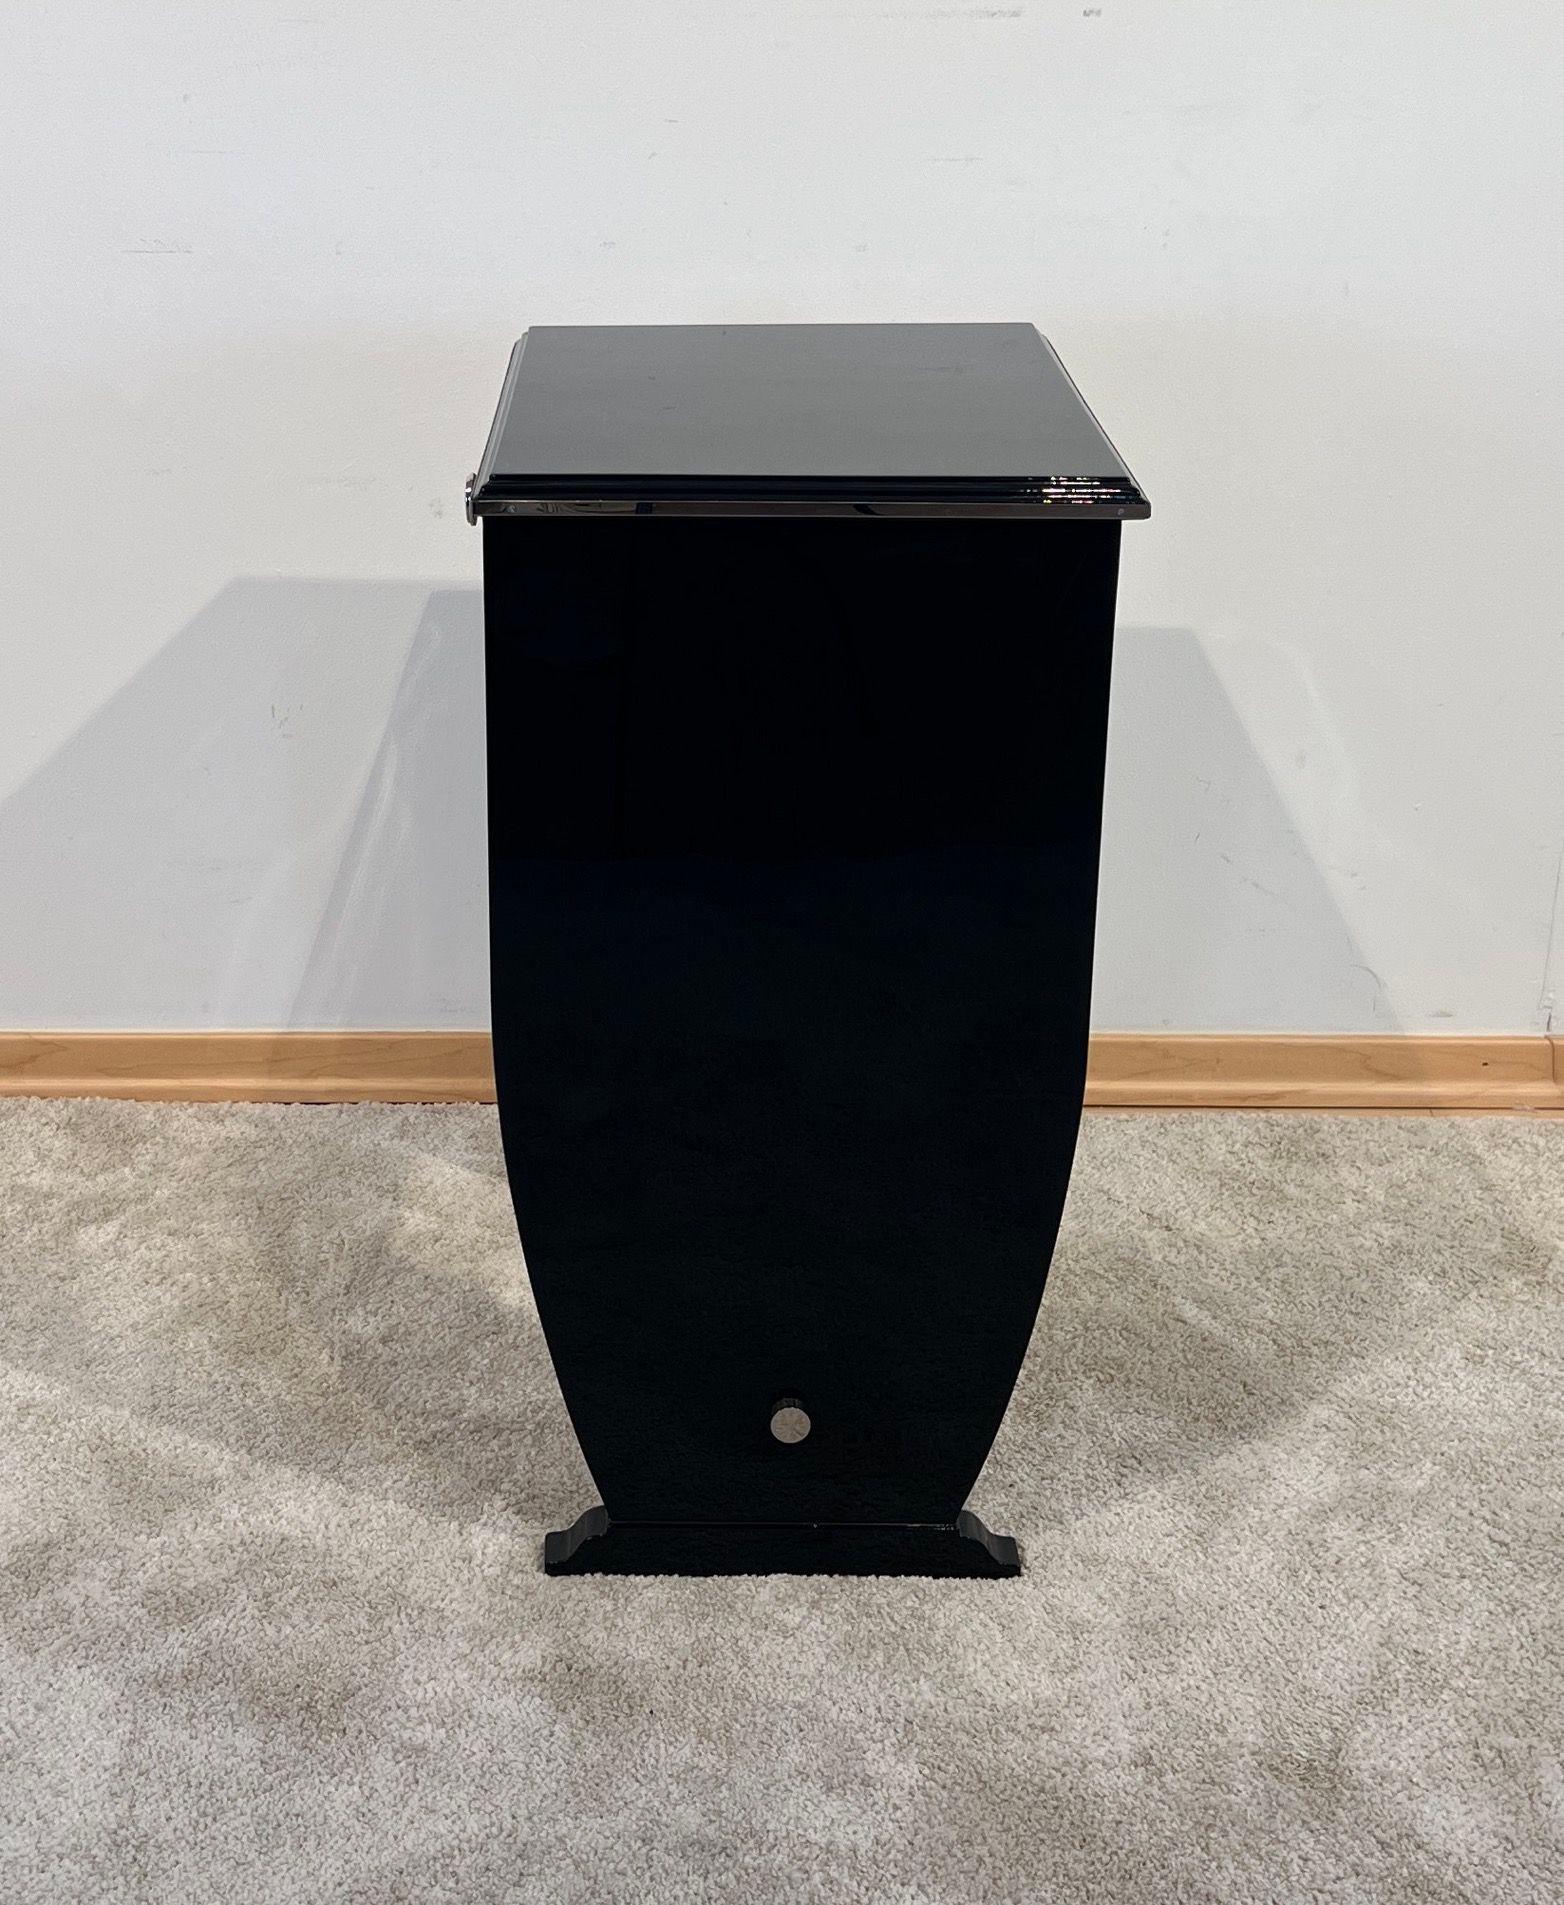 Stainless Steel Art Deco Side Table with Drawer, Black Lacquer and Chrome, France circa 1930 For Sale